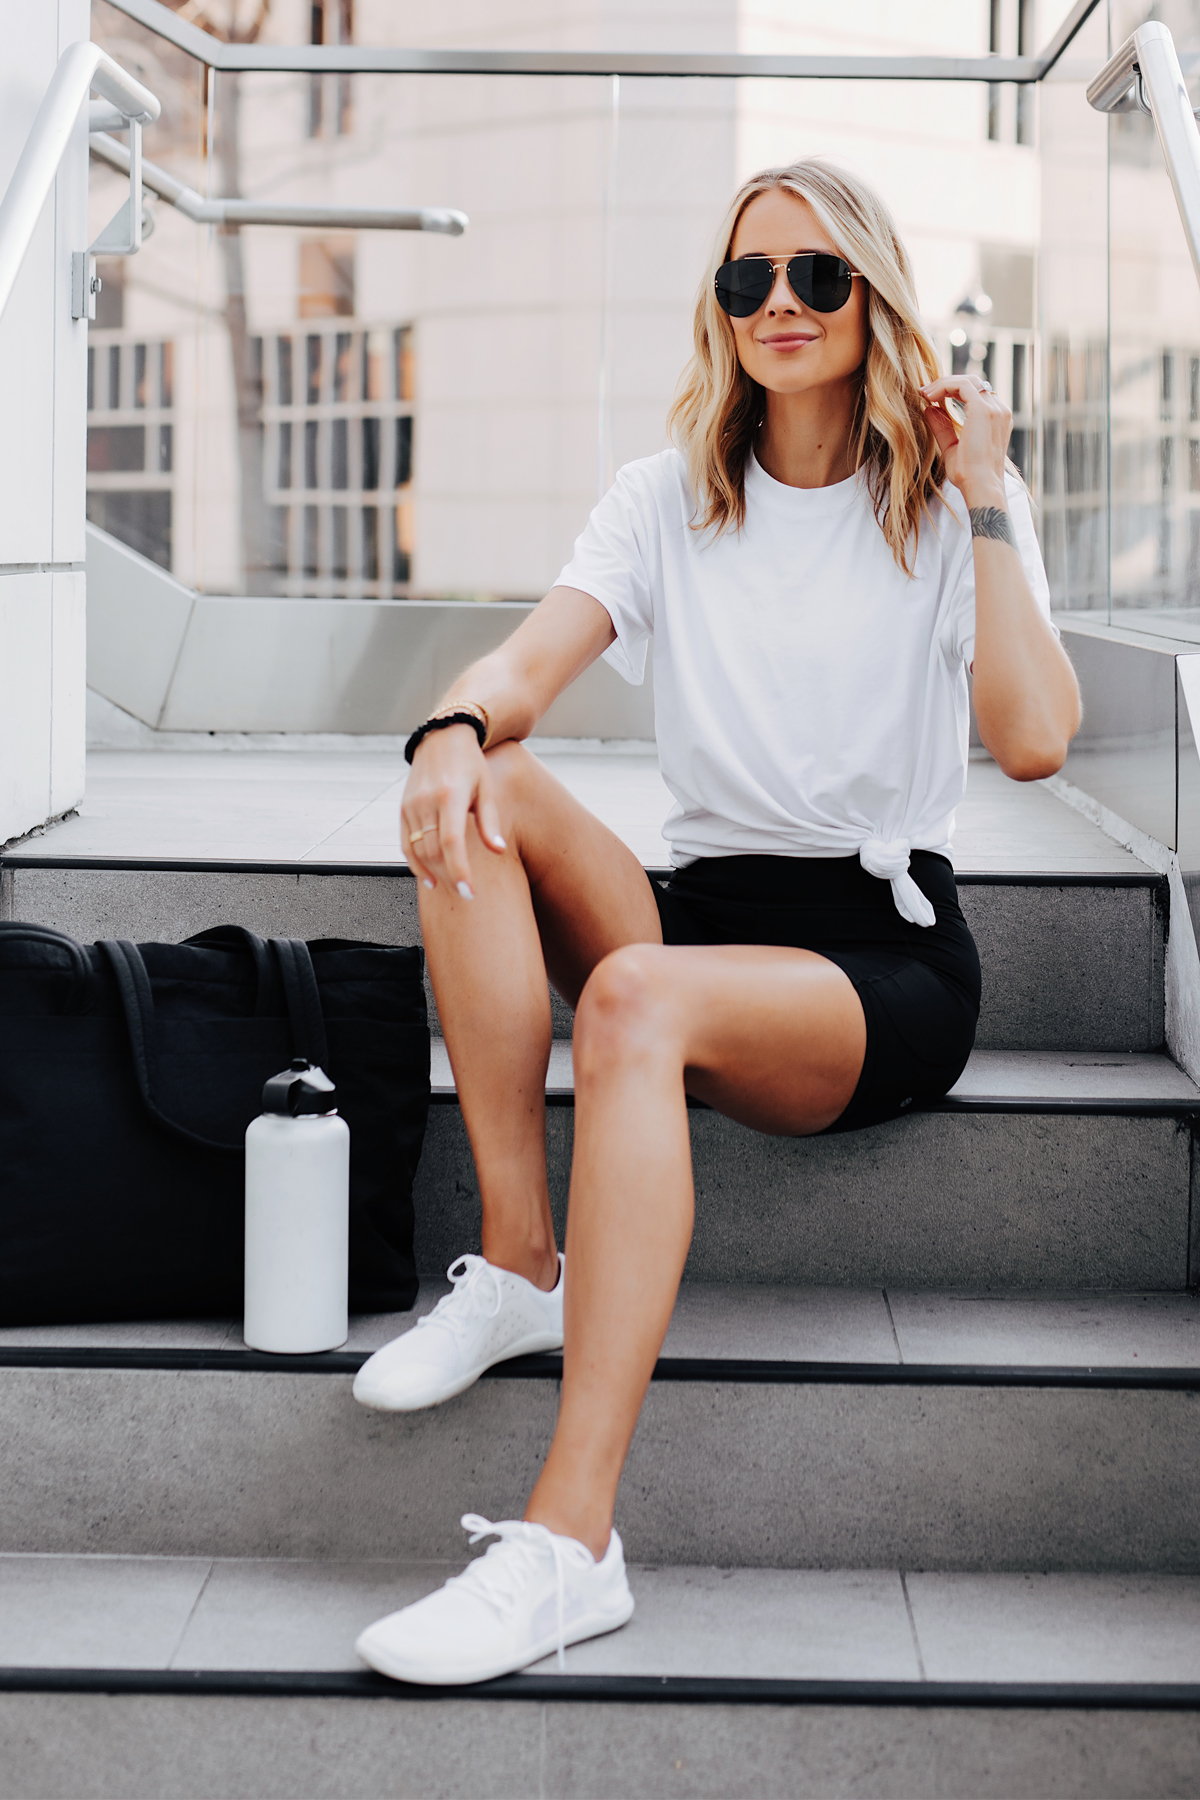 lululemon airport outfit